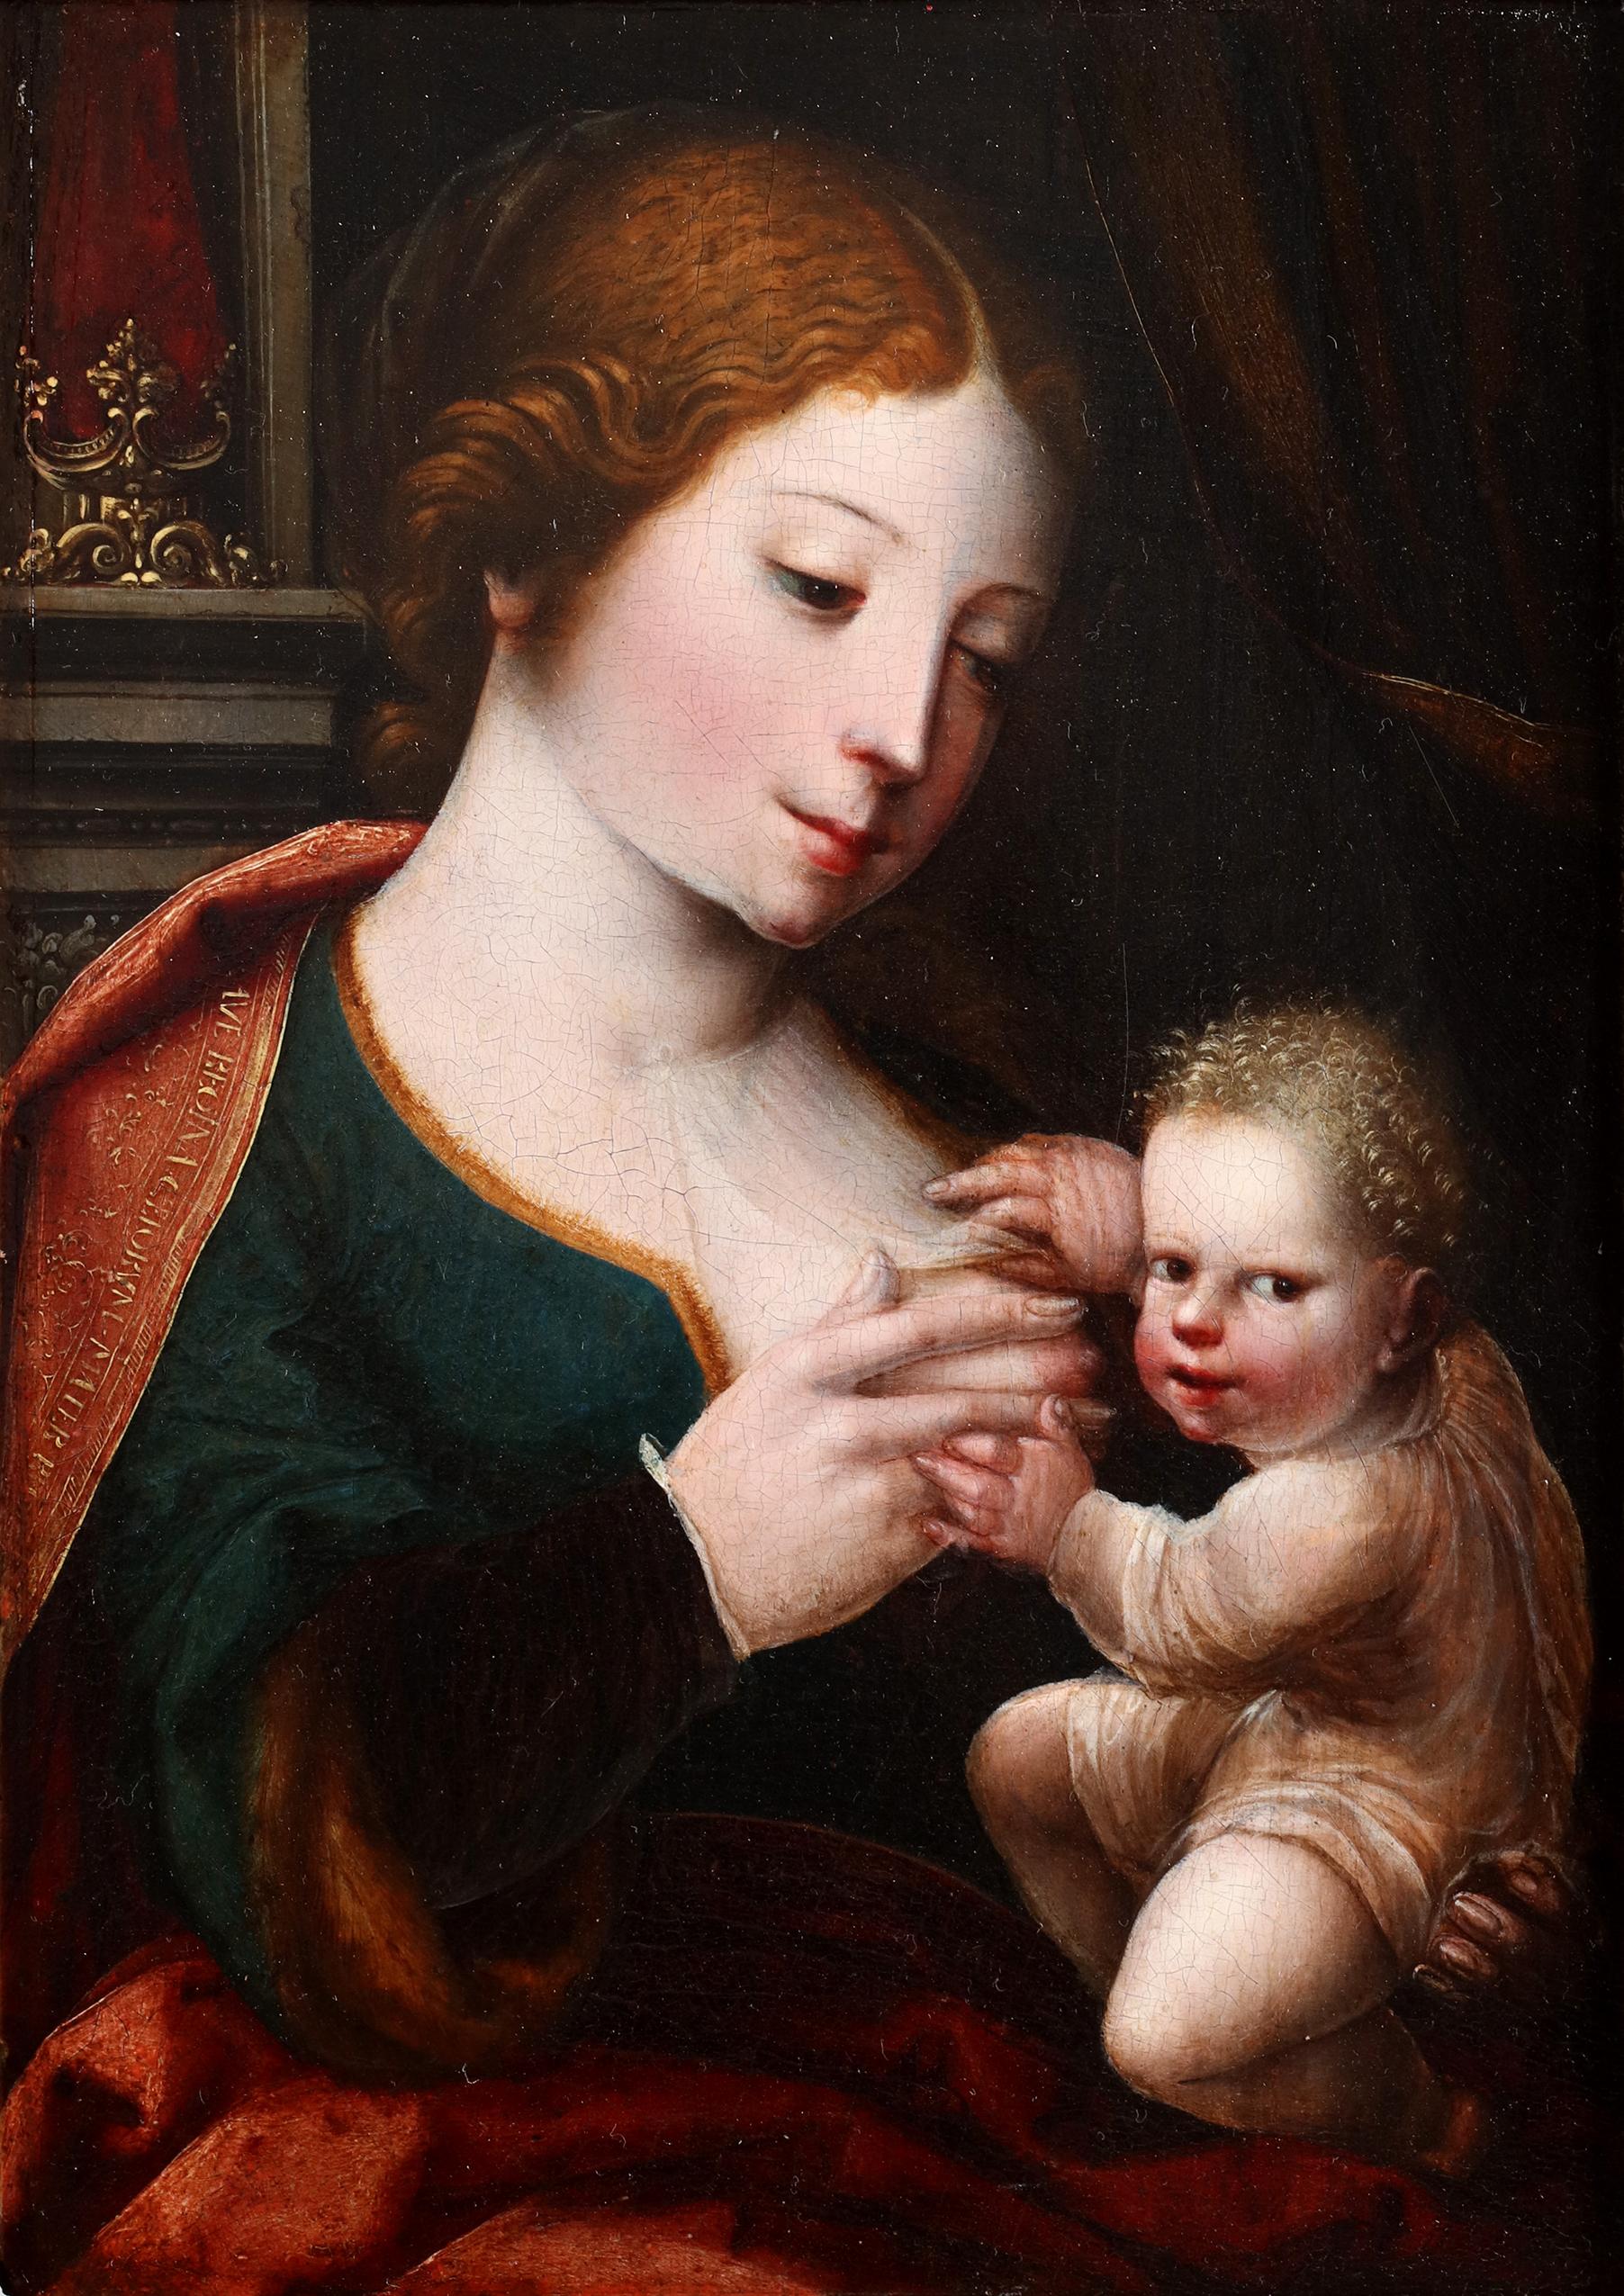 Virgin and Child - (Attr.) to Master with the Parrot (active 1520 - 1540) - Painting by The Master with the Parrot